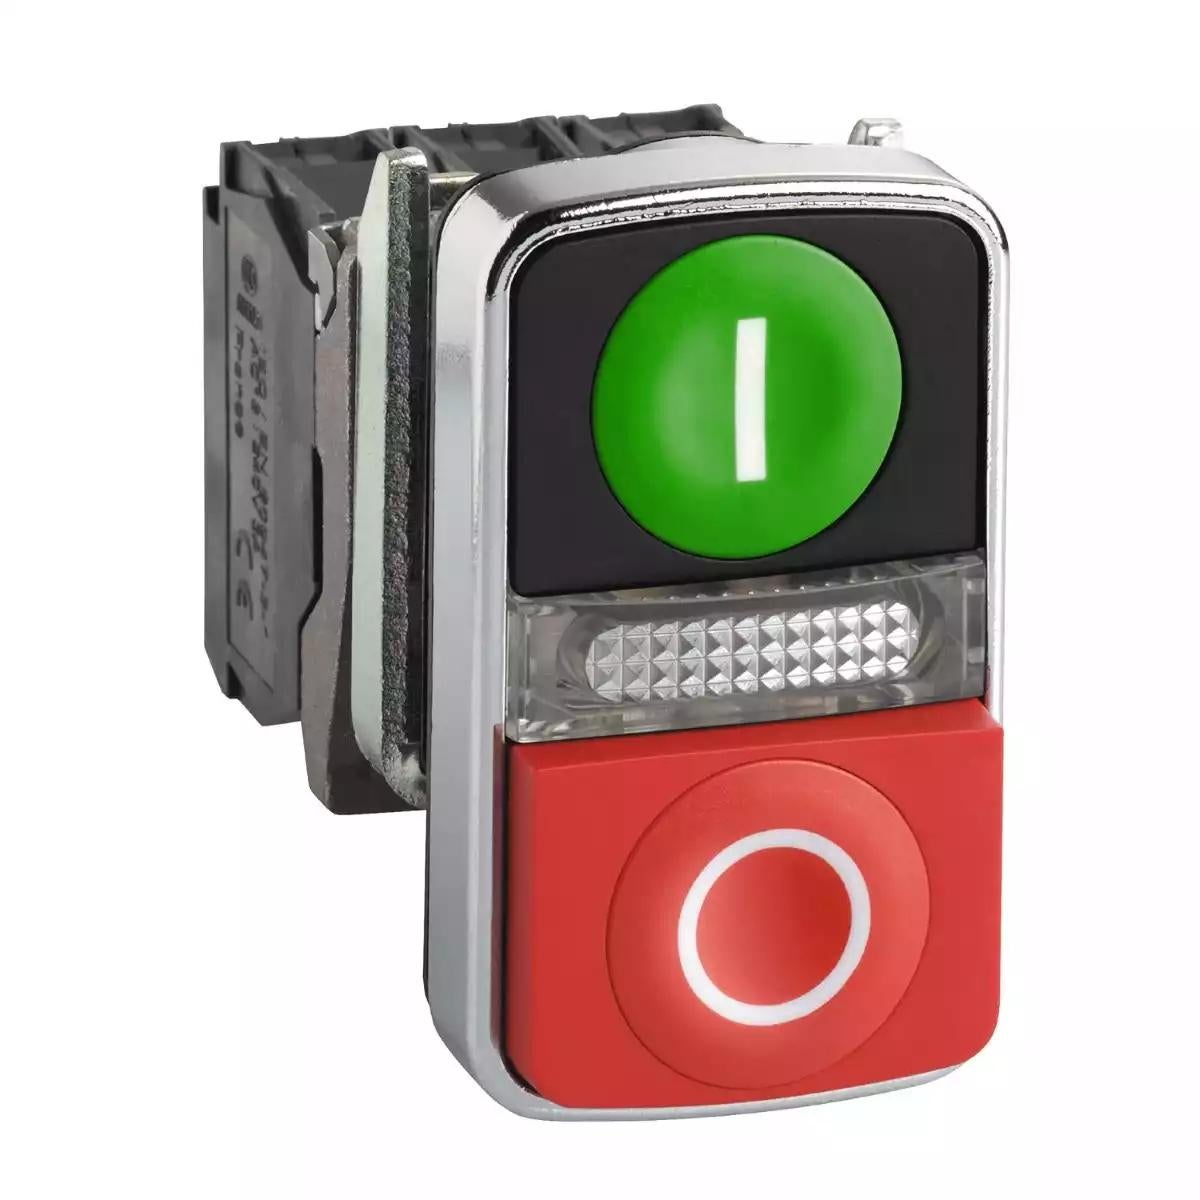 Schneider Electric Harmony XB4 green flush/red projecting illuminated double-headed pushbutton Ã˜22 1NO+1NC 24V